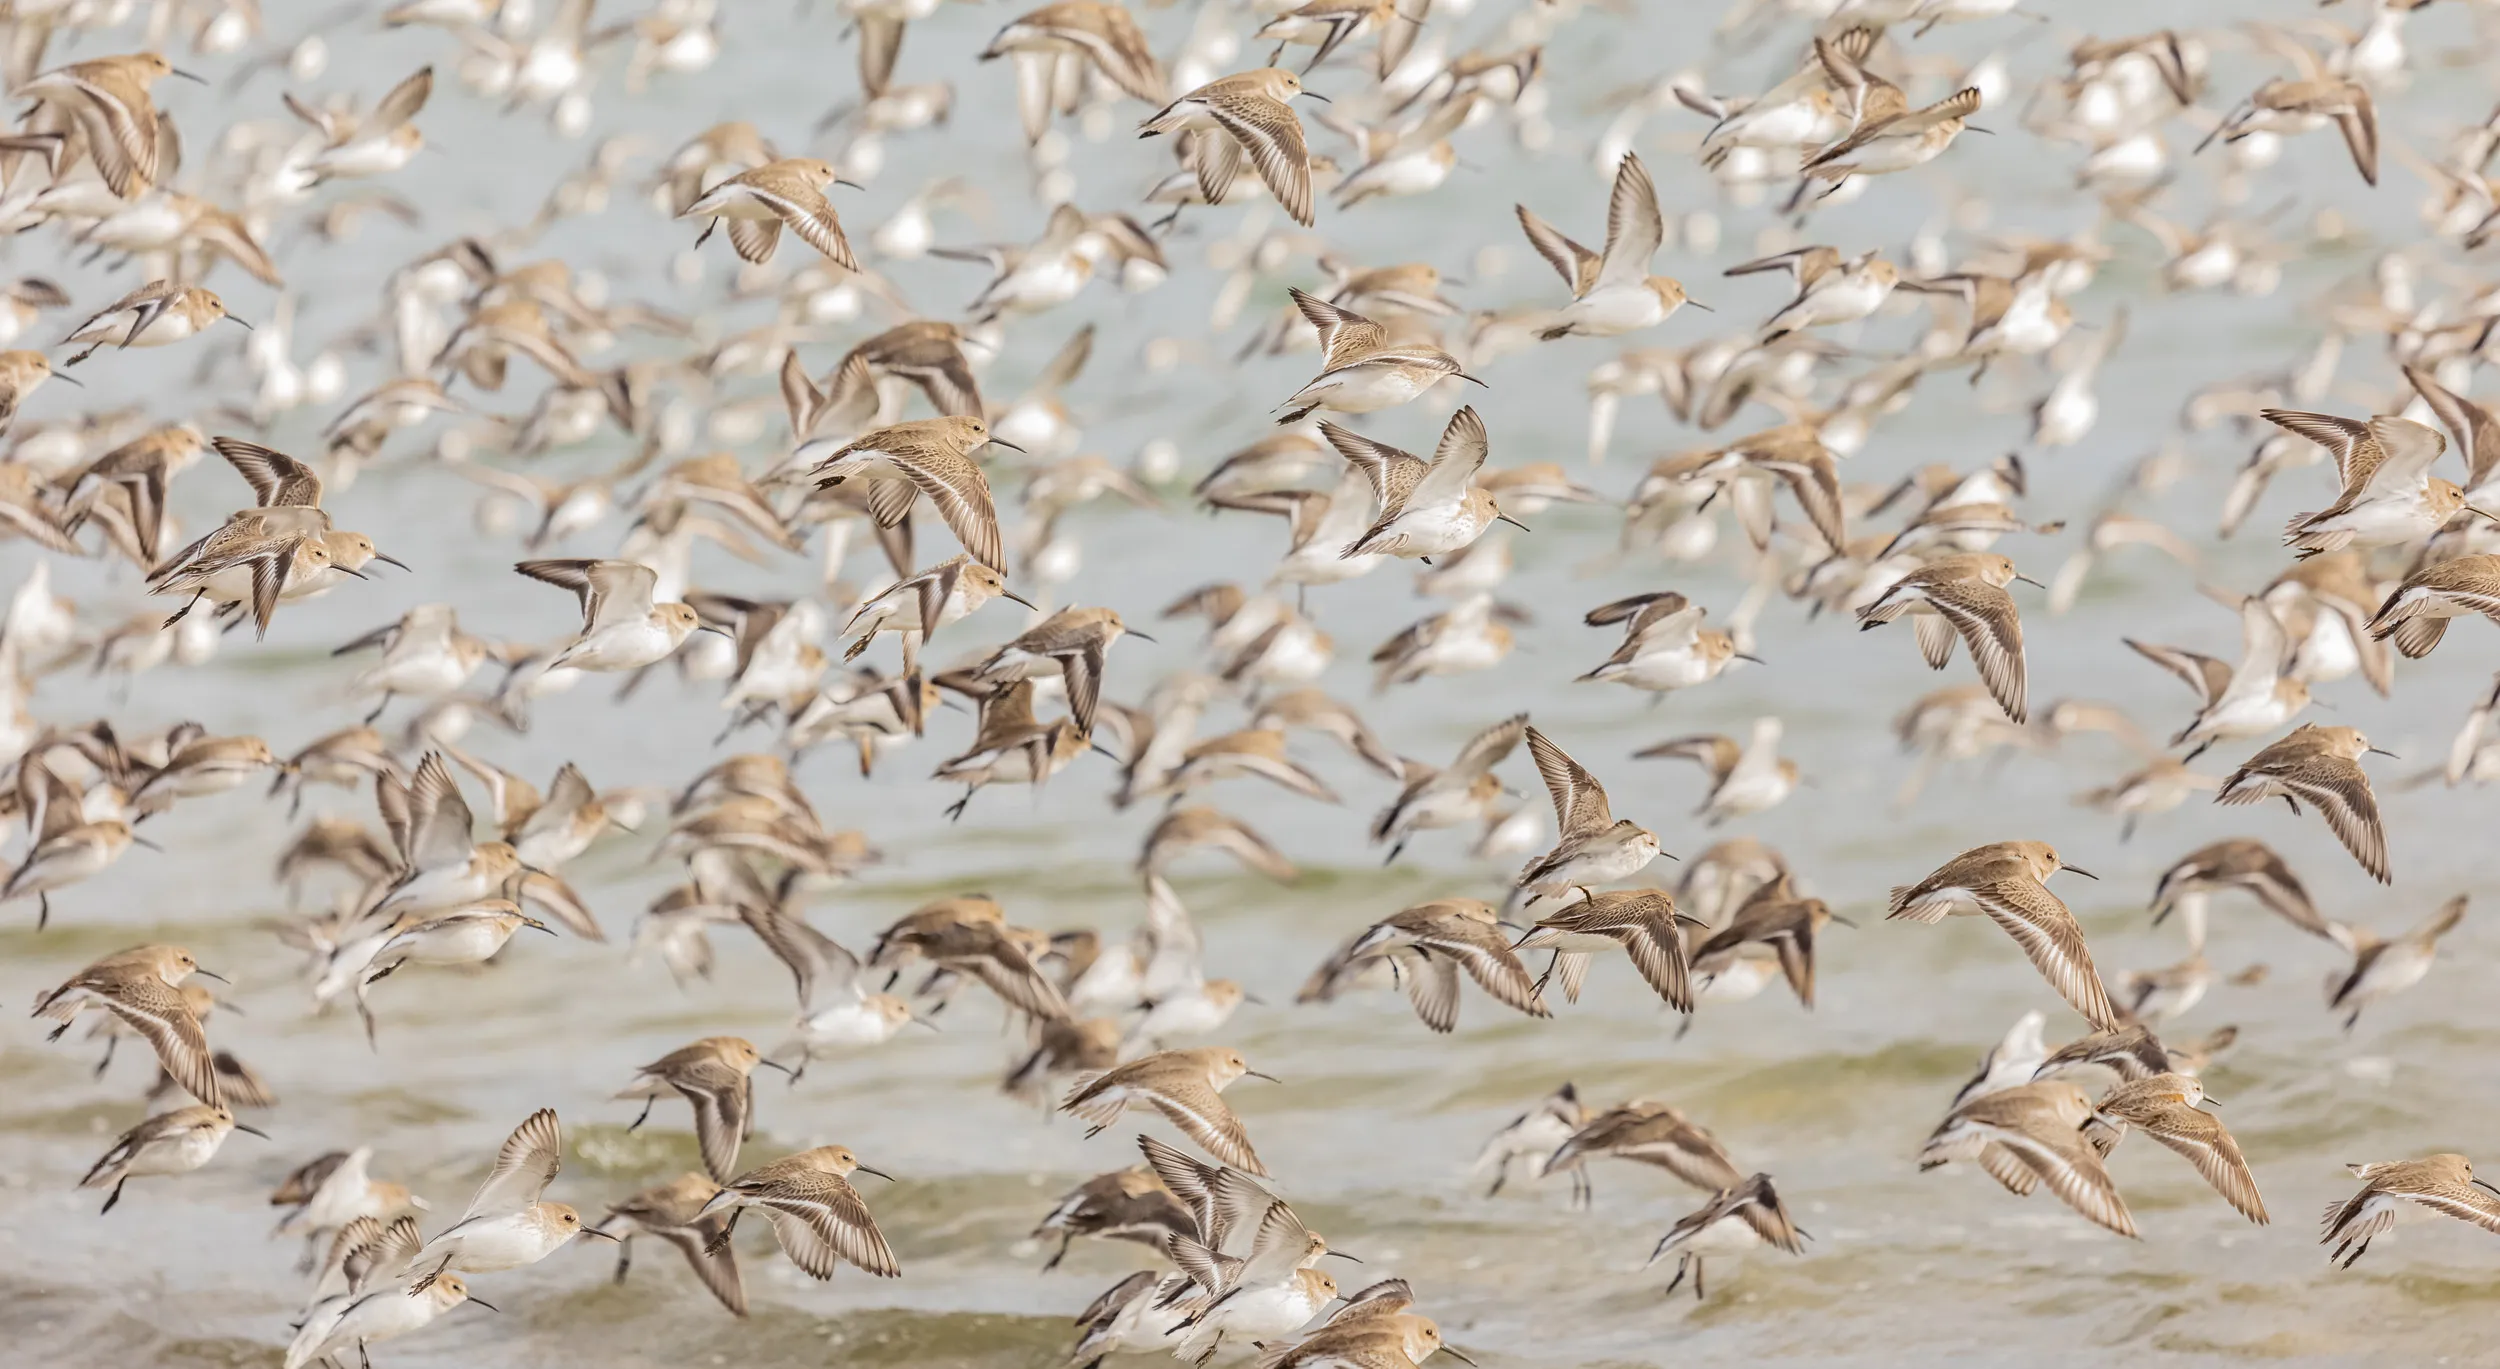 A flock of brown and white birds in low flight over calm ocean water